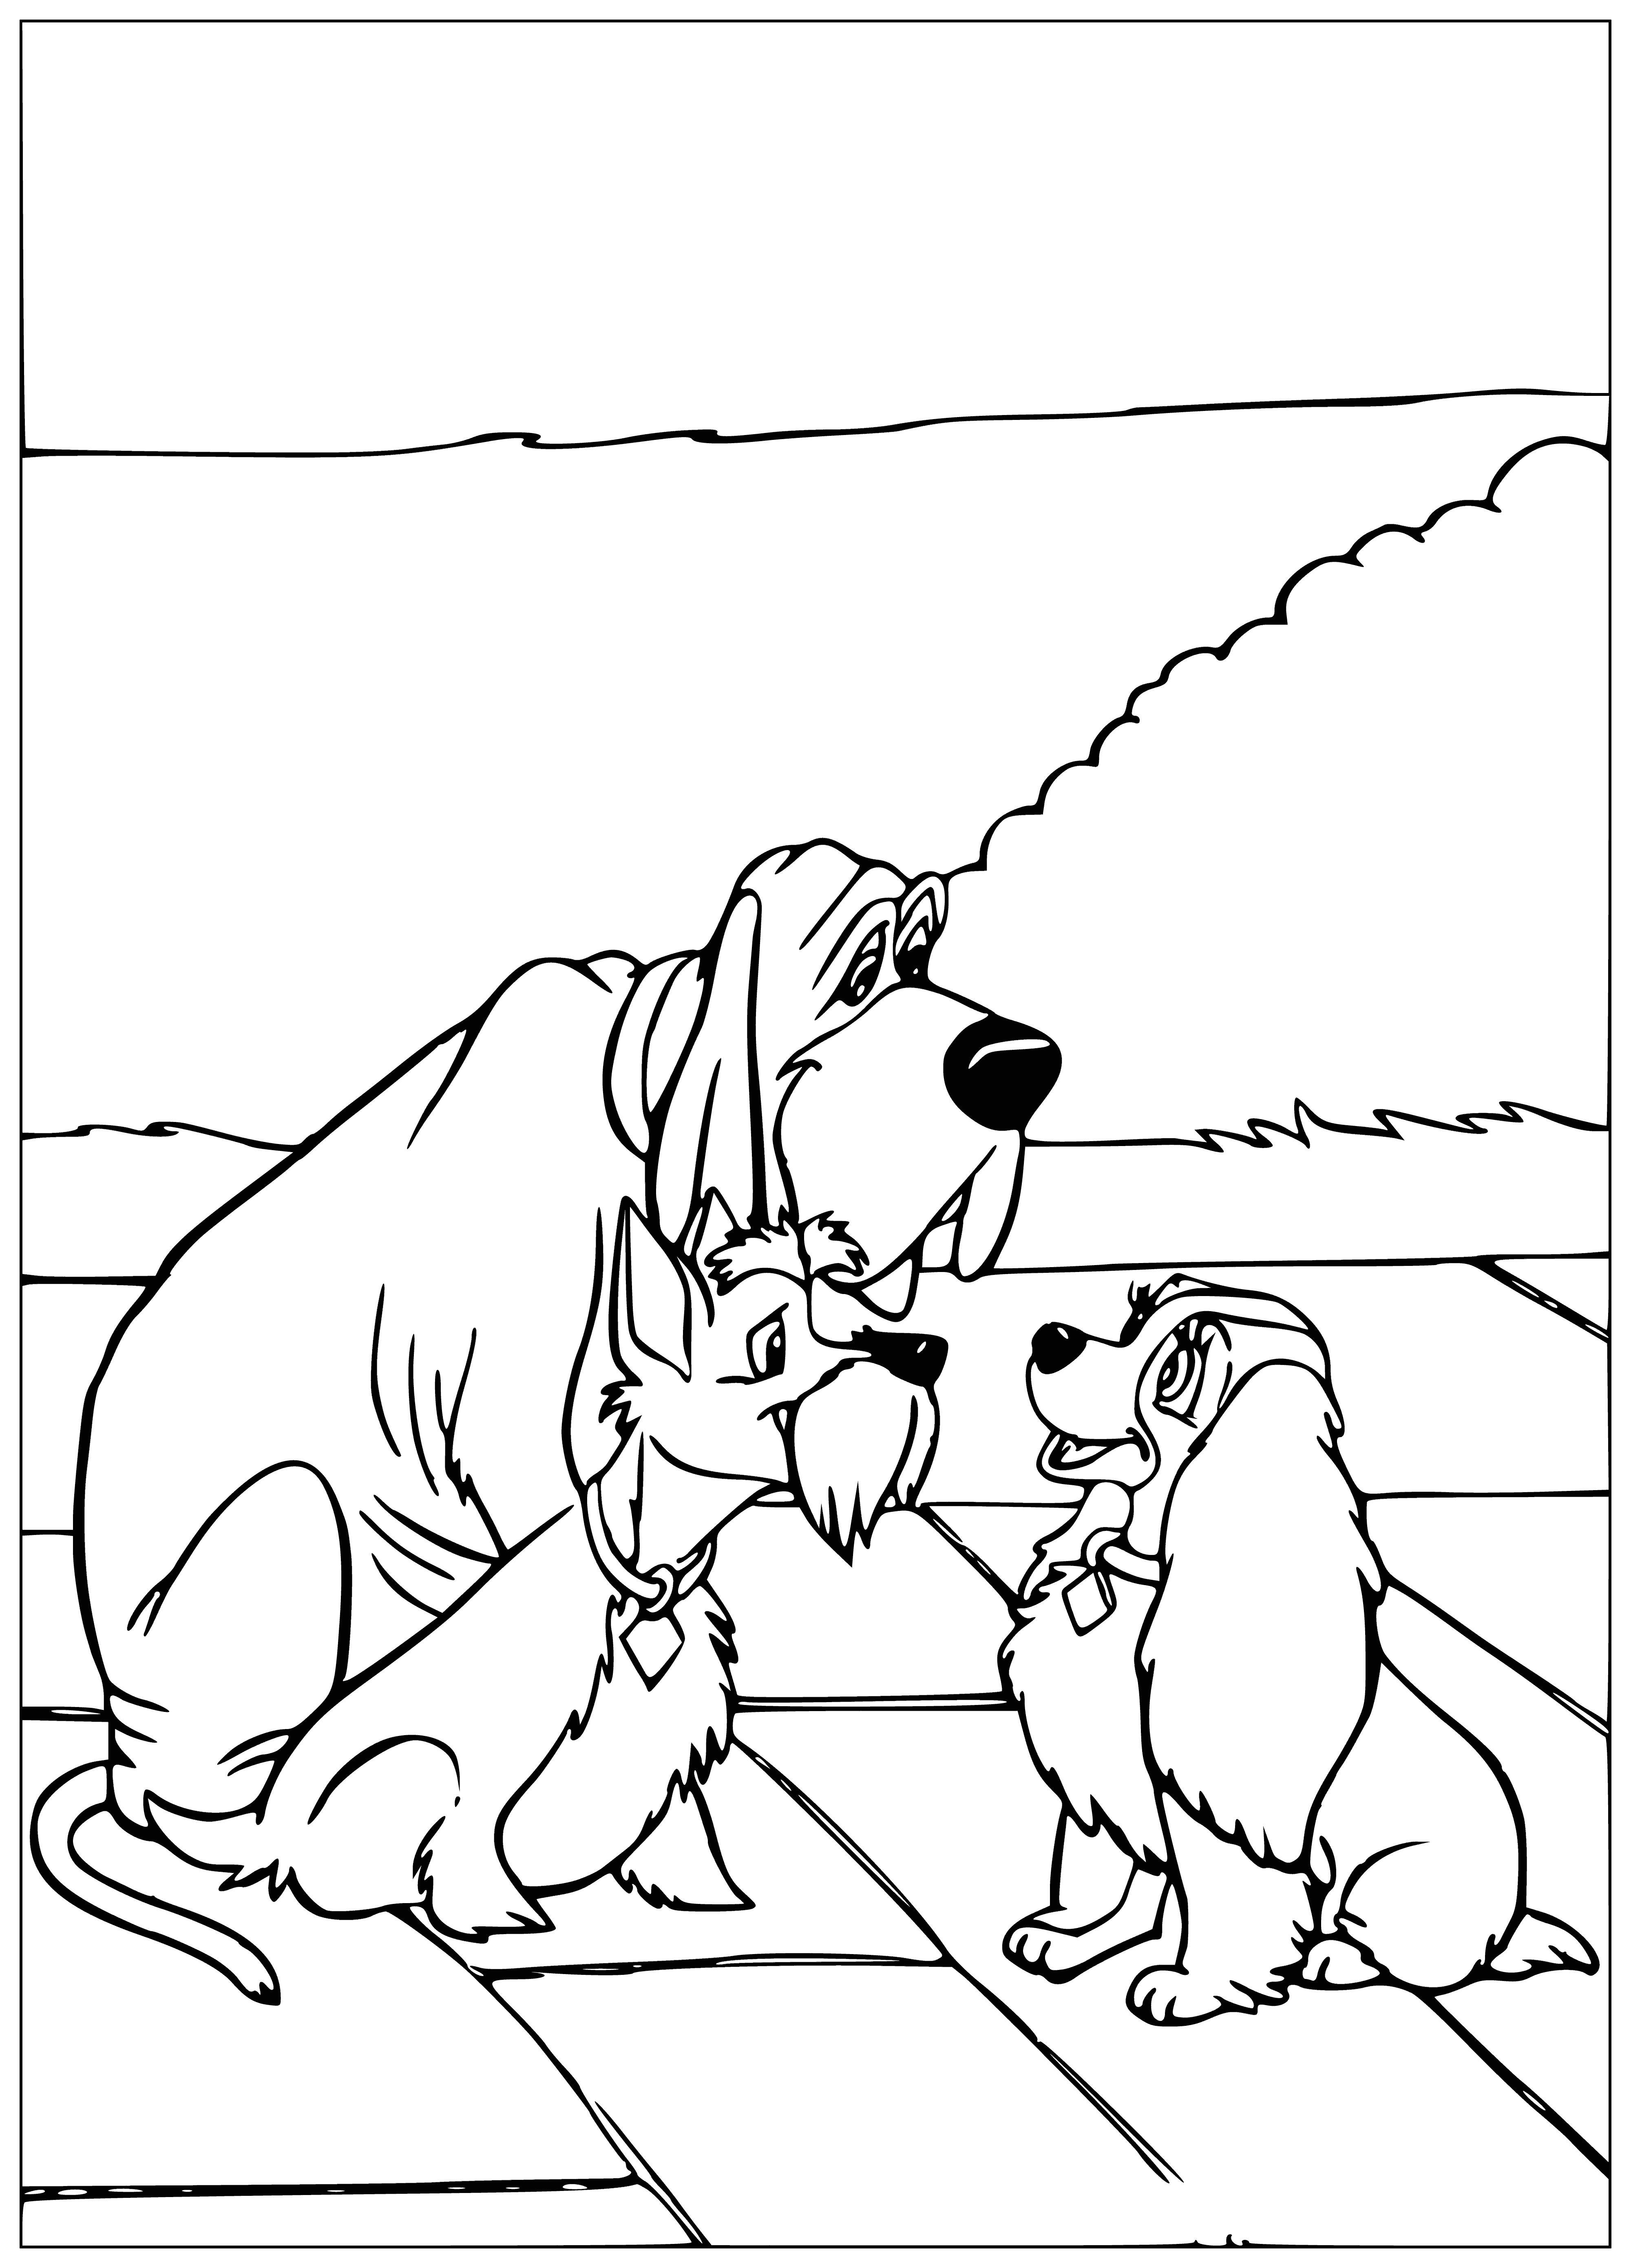 Dogs coloring page